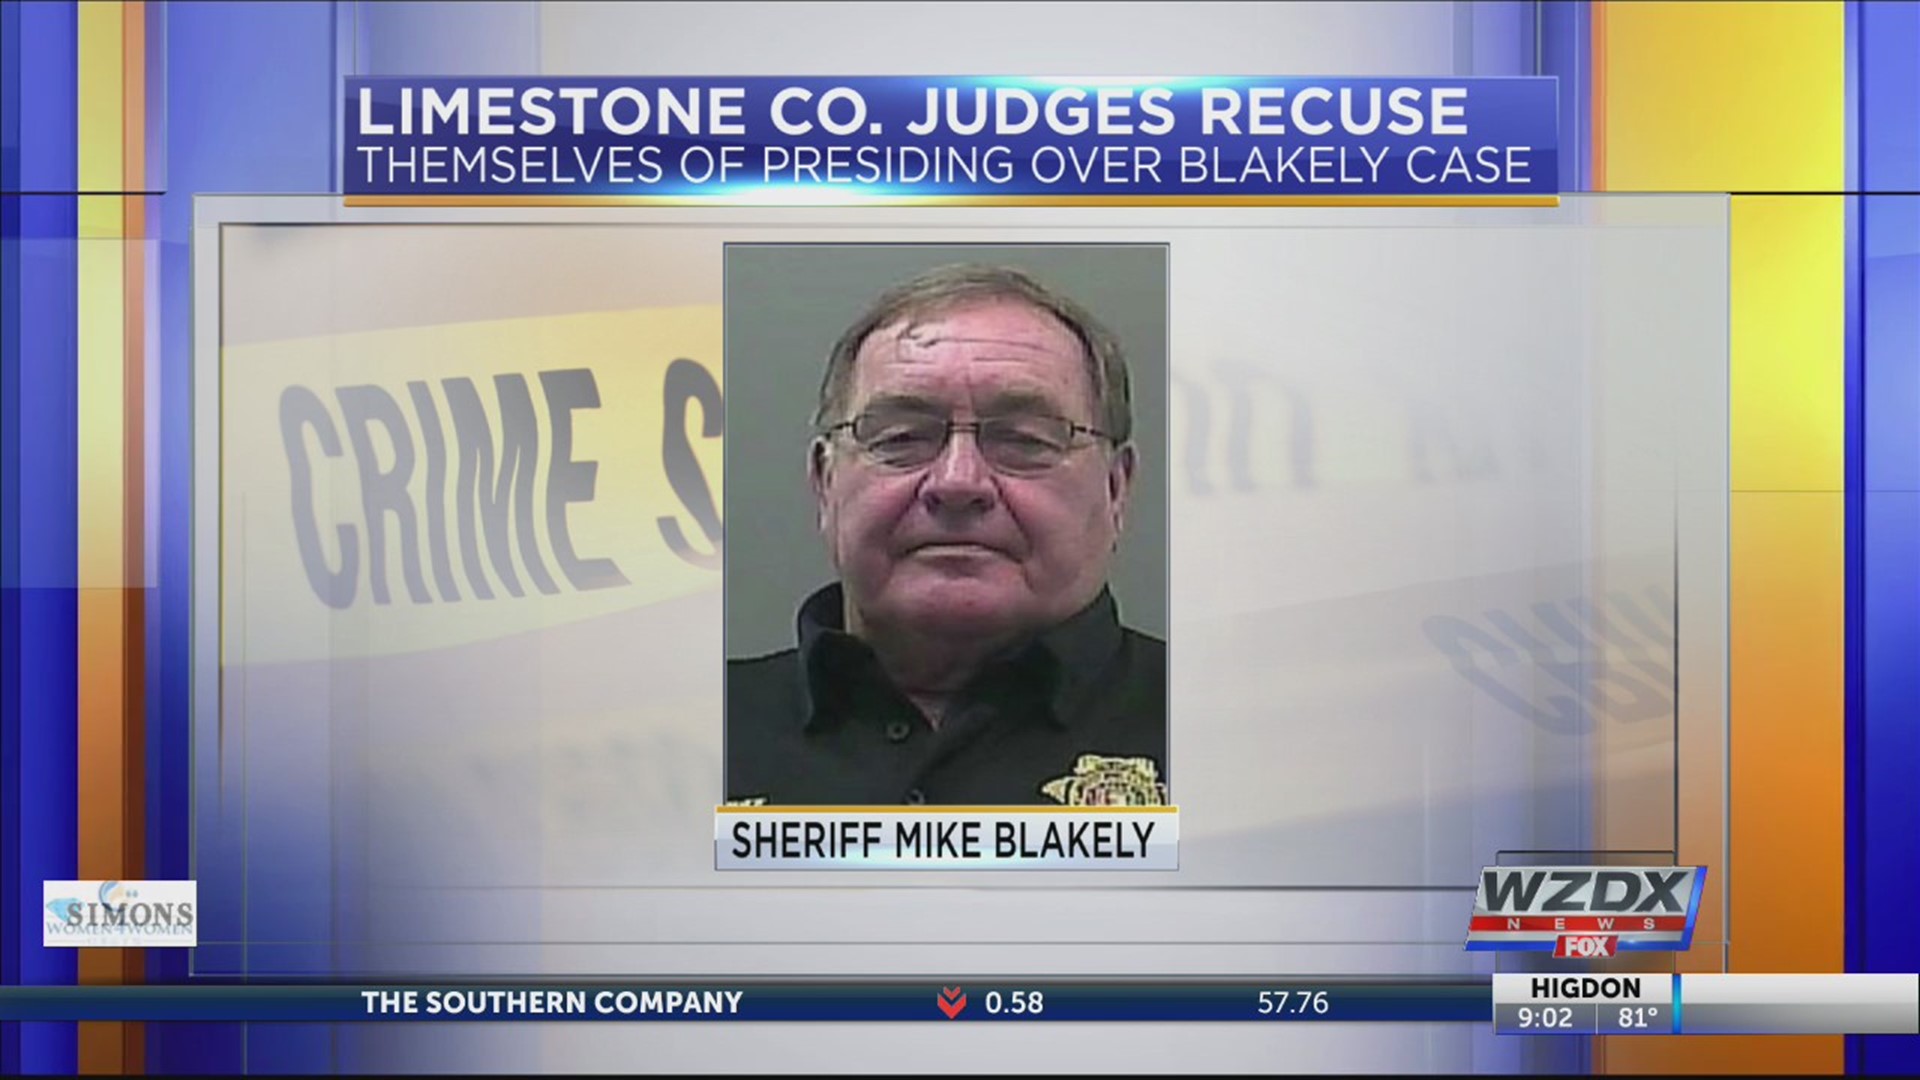 All four Limestone County judges have recused themselves from presiding over Sheriff Blakely's case.